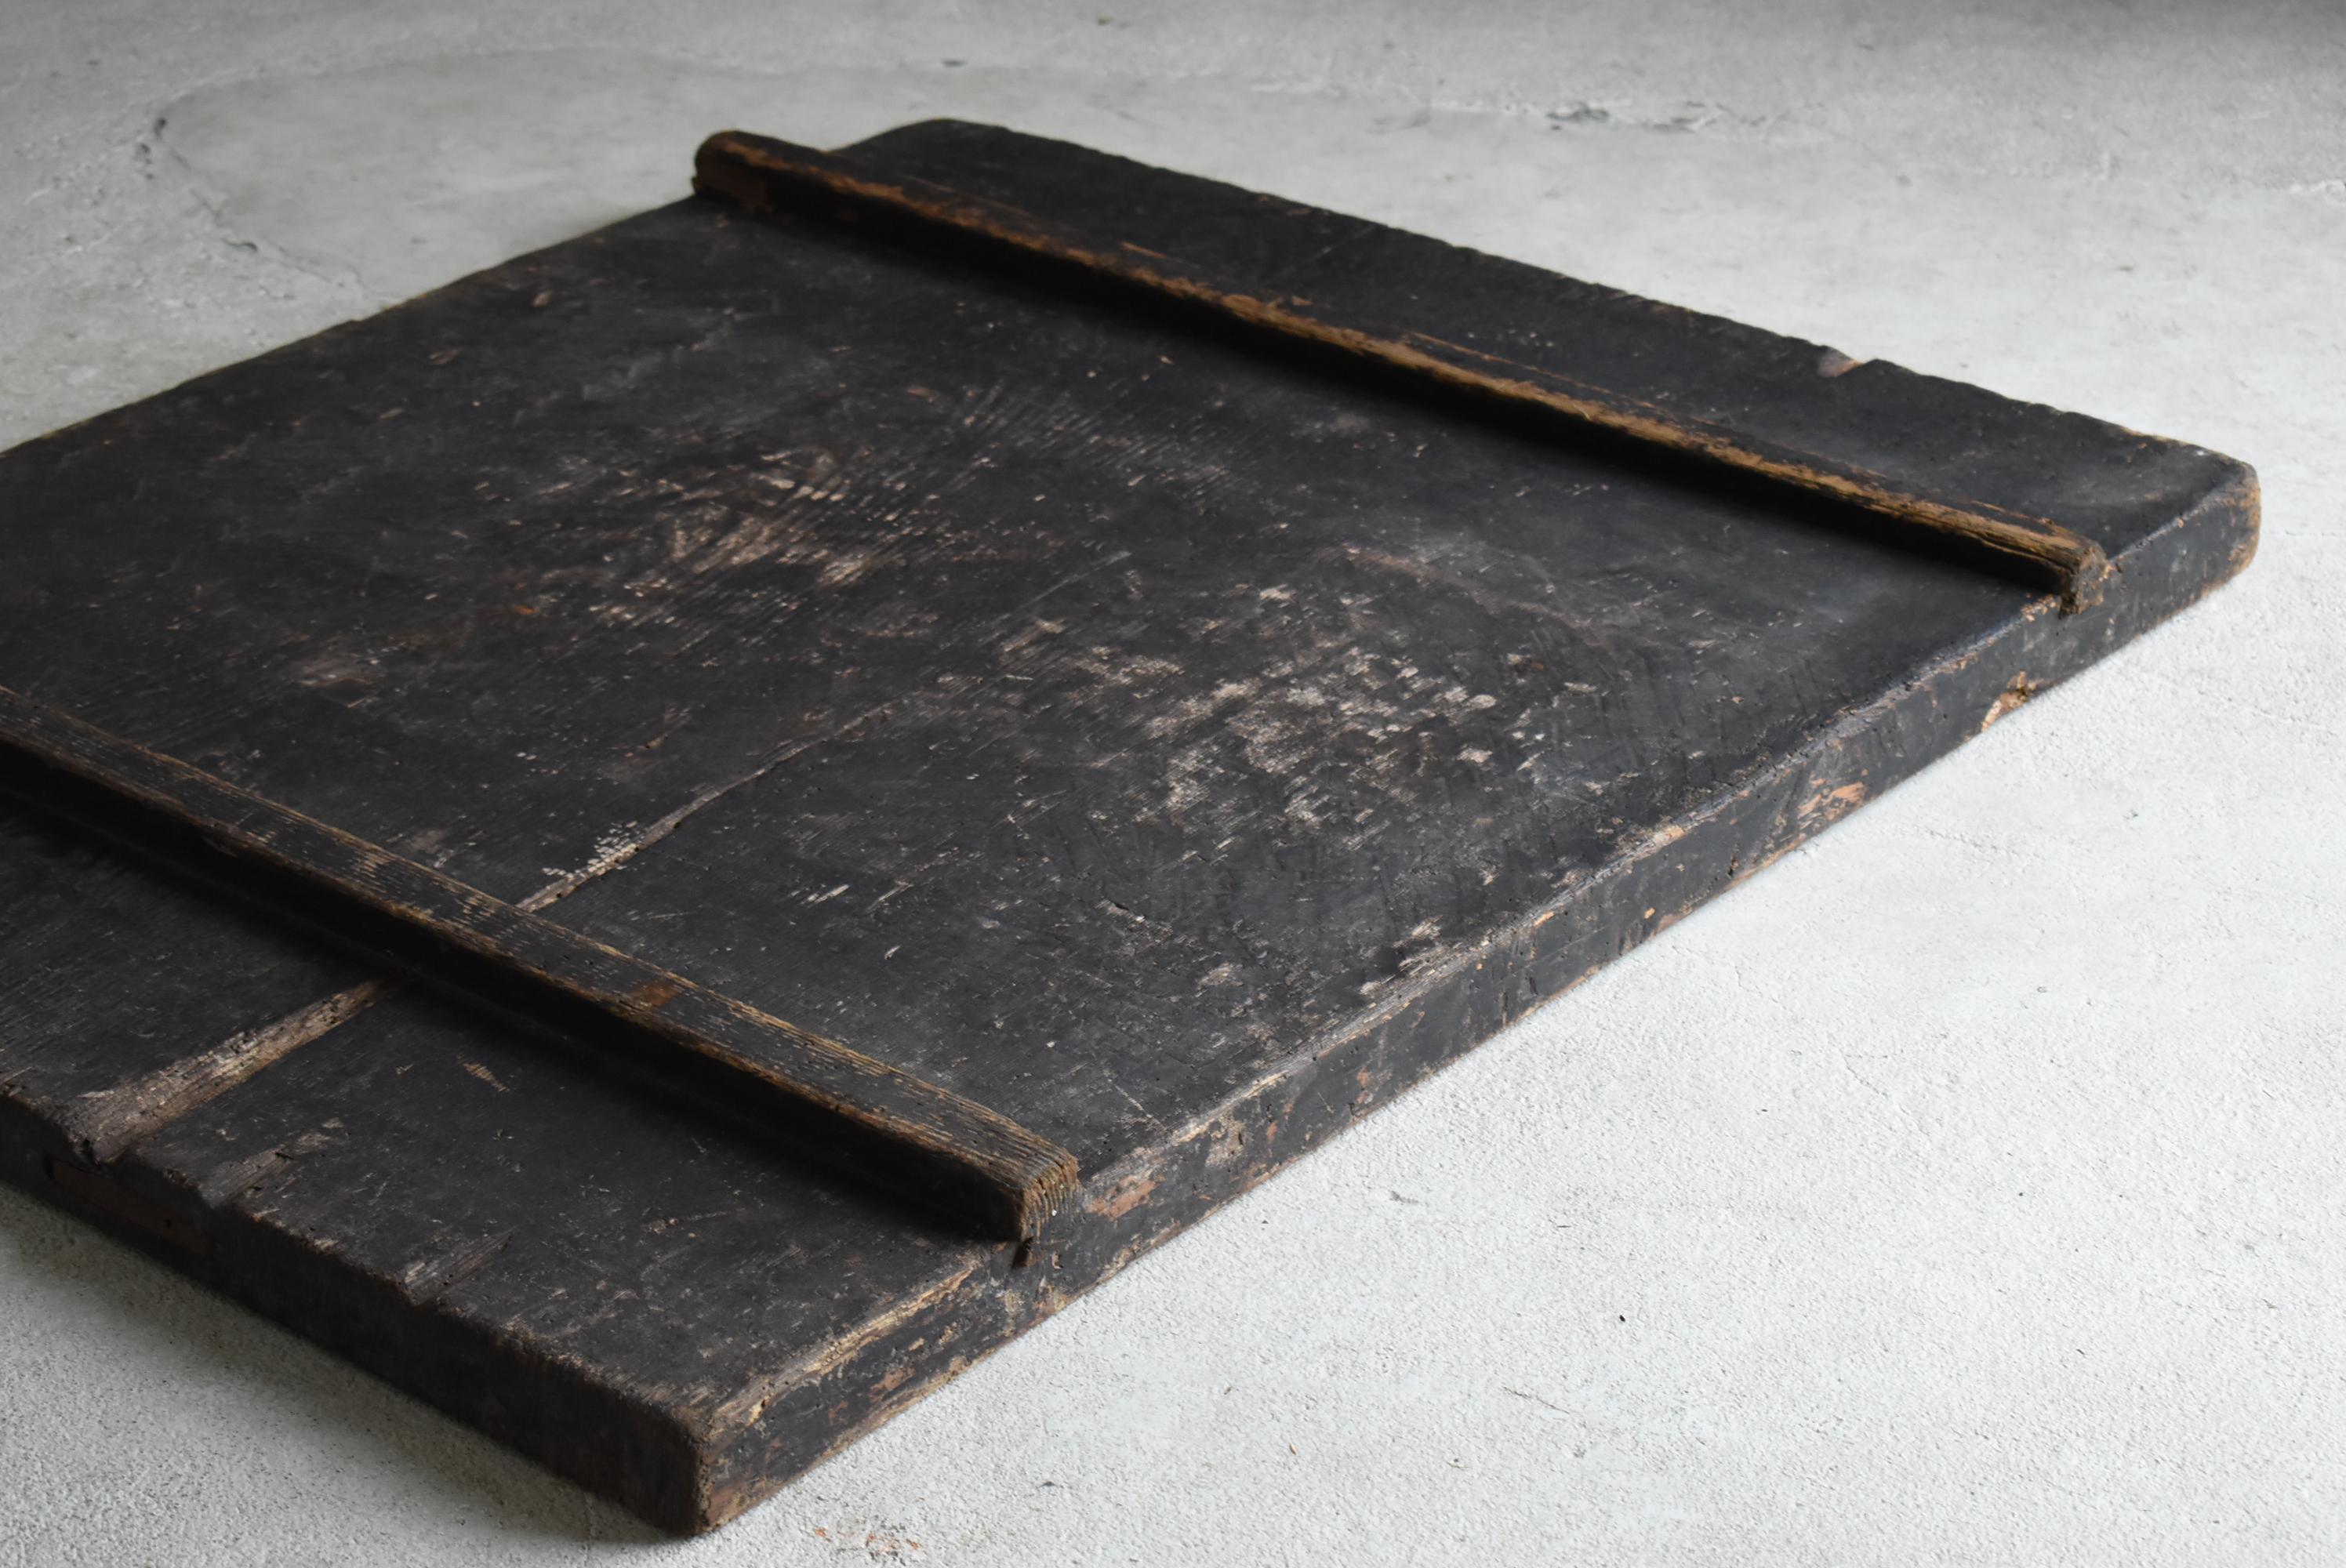 Japanese Antique Extra-Large Wooden board 1860s-1900s / Wabi Sabi Abstract Art 9